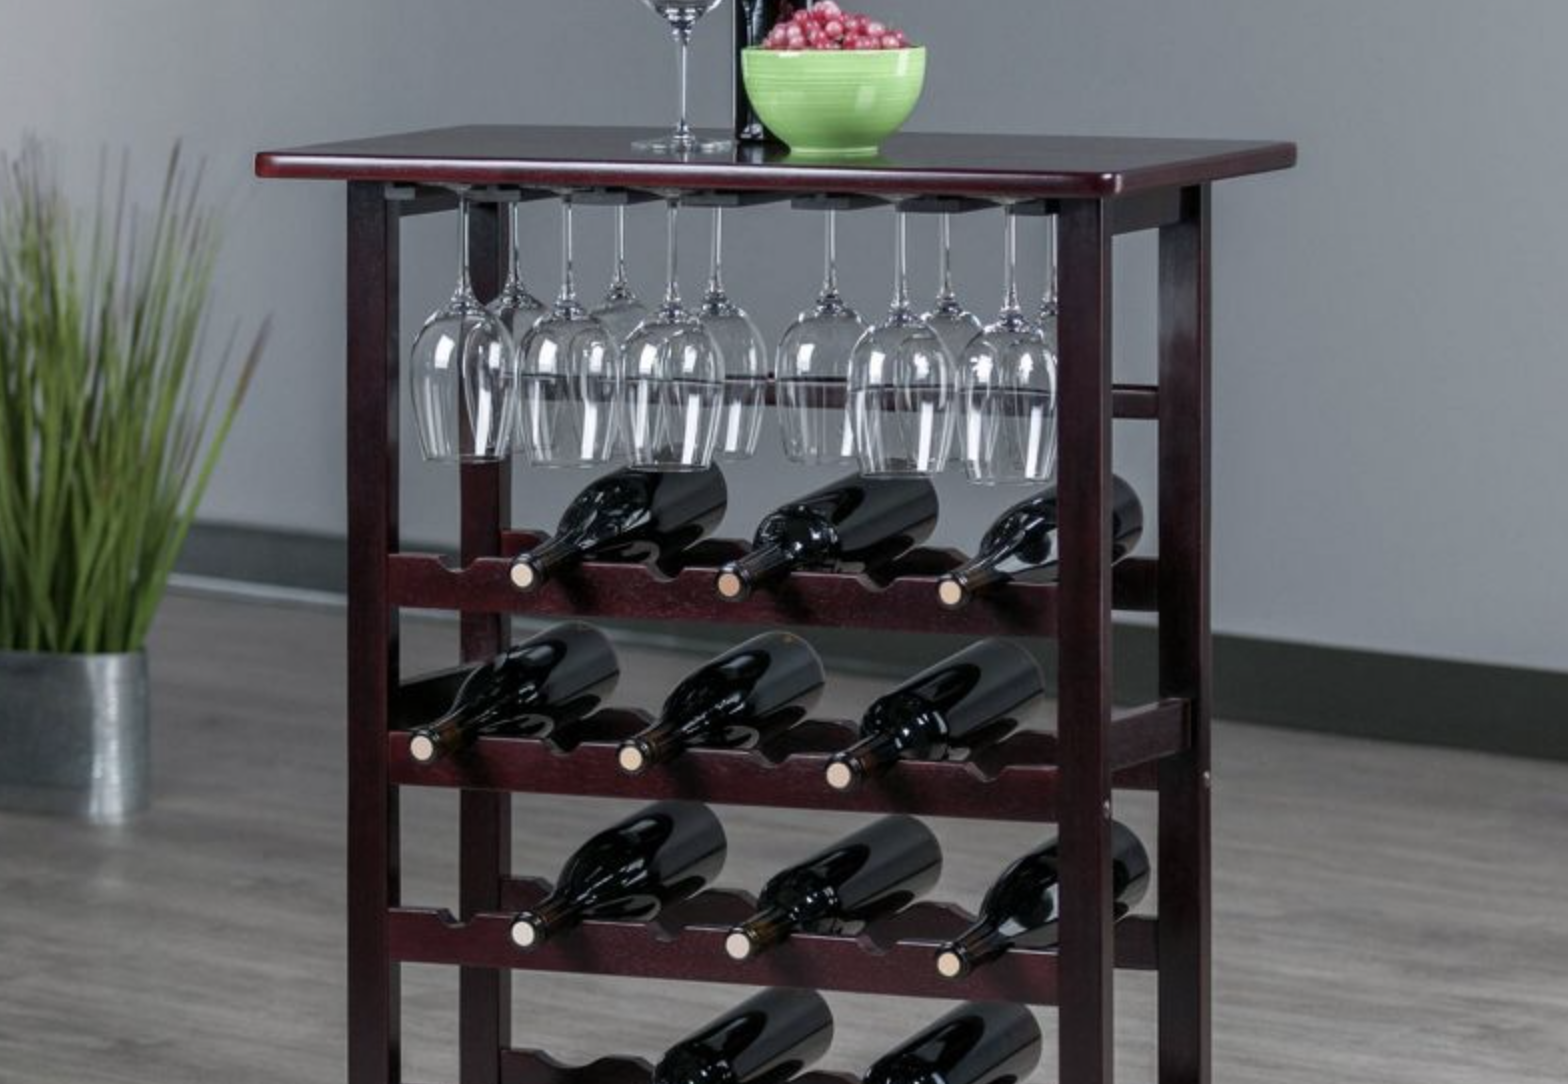 The wooden wine rack storing 11 bottles of wine vertically with wine glasses hanging from below tabletop. Wine bottle, wine glass and bowl of grapes served on top of rack